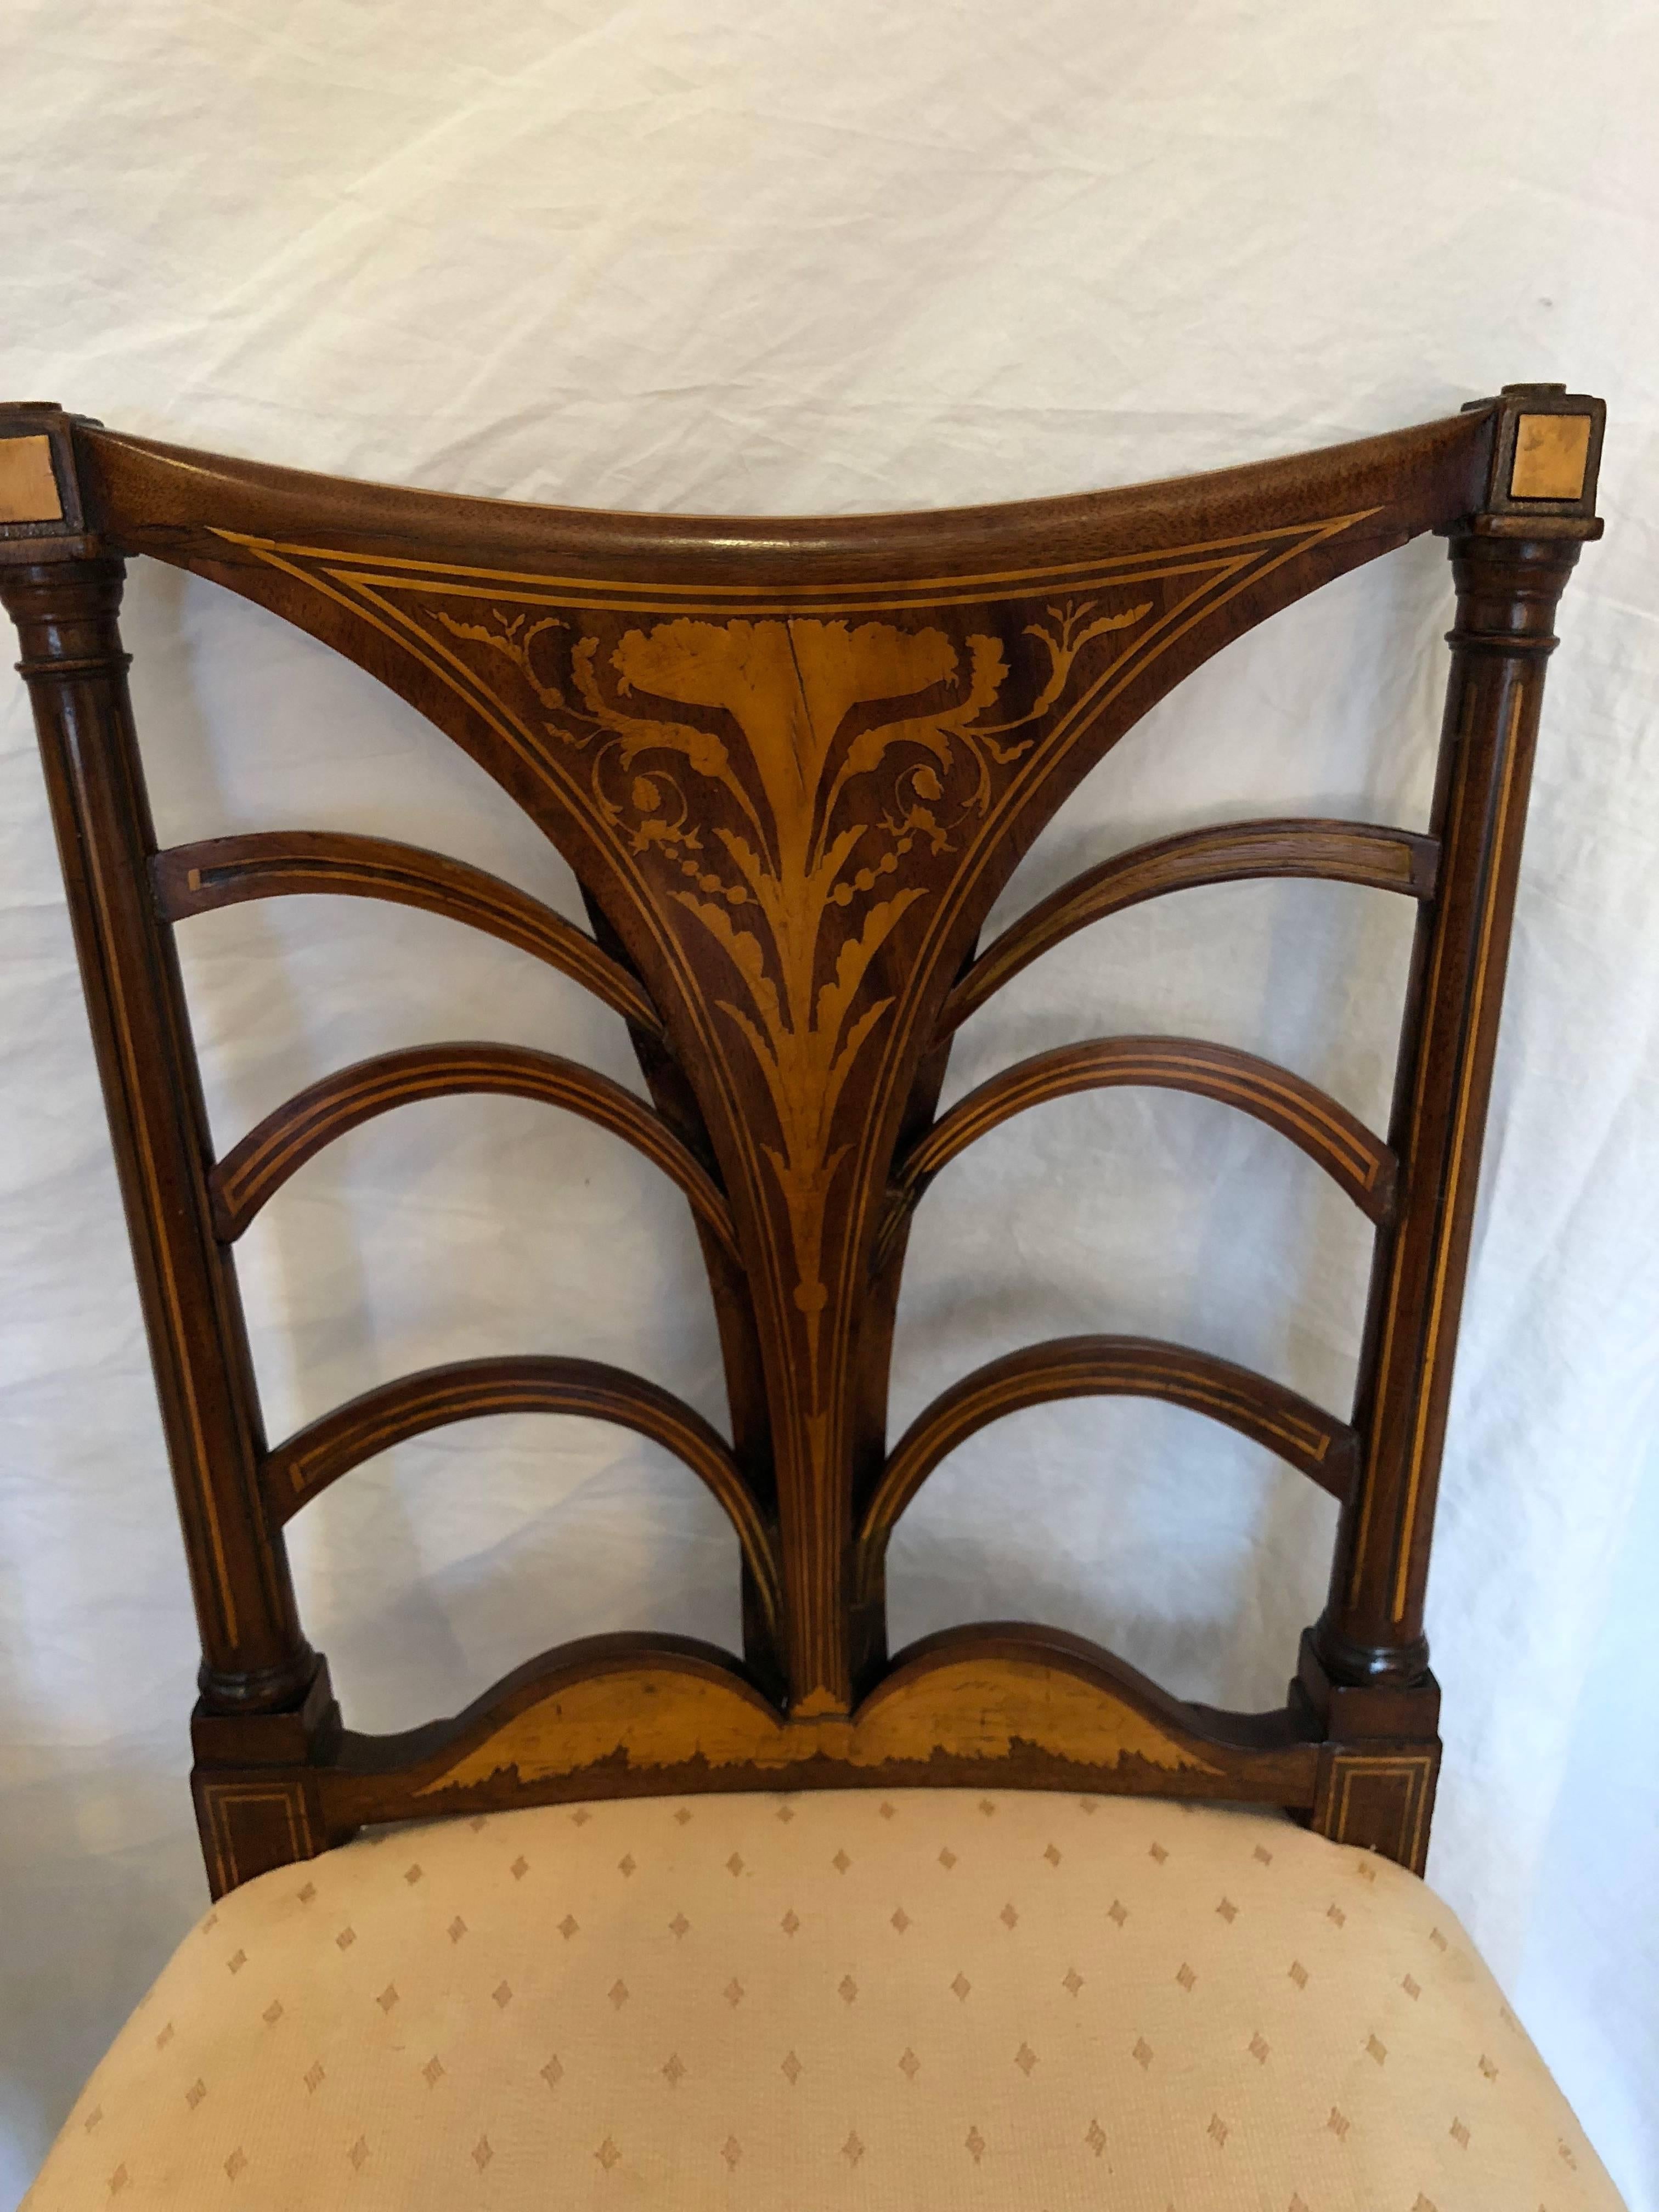 Set of 6 English Regency dining chairs

First half 19th century, circa 1825 

35" high, 20" width, 17" deep, 19" seat hight 

Chairs are in good overall condition with small cracking in the inlay and old nail holes from previous